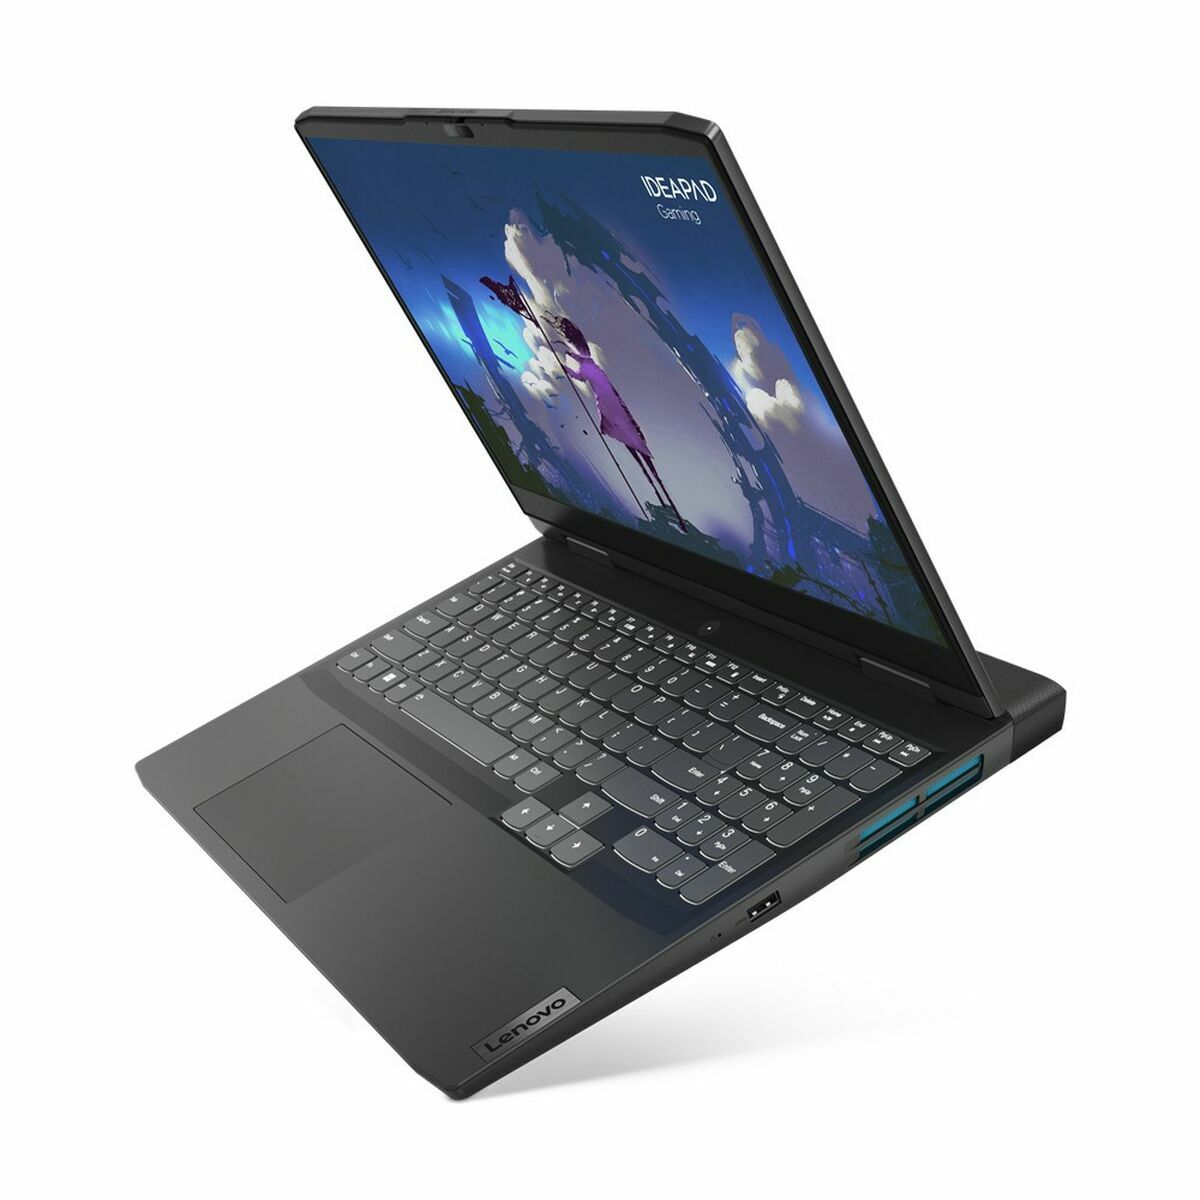 Laptop Lenovo Gaming 3 15IAH7 15,6" i7-12650H 16 GB RAM 512 GB SSD NVIDIA GeForce RTX 3050 Spanish Qwerty, Lenovo, Computing, notebook-lenovo-gaming-3-15iah7-16-gb-ram-15-6-i7-12650h-spanish-qwerty, :2-in-1, :512 GB, :Gaming Laptop, :Intel-i7, :QWERTY, :RAM 16 GB, :Touchscreen, Brand_Lenovo, category-reference-2609, category-reference-2791, category-reference-2797, category-reference-t-19685, Condition_NEW, office, Price_+ 1000, Teleworking, RiotNook